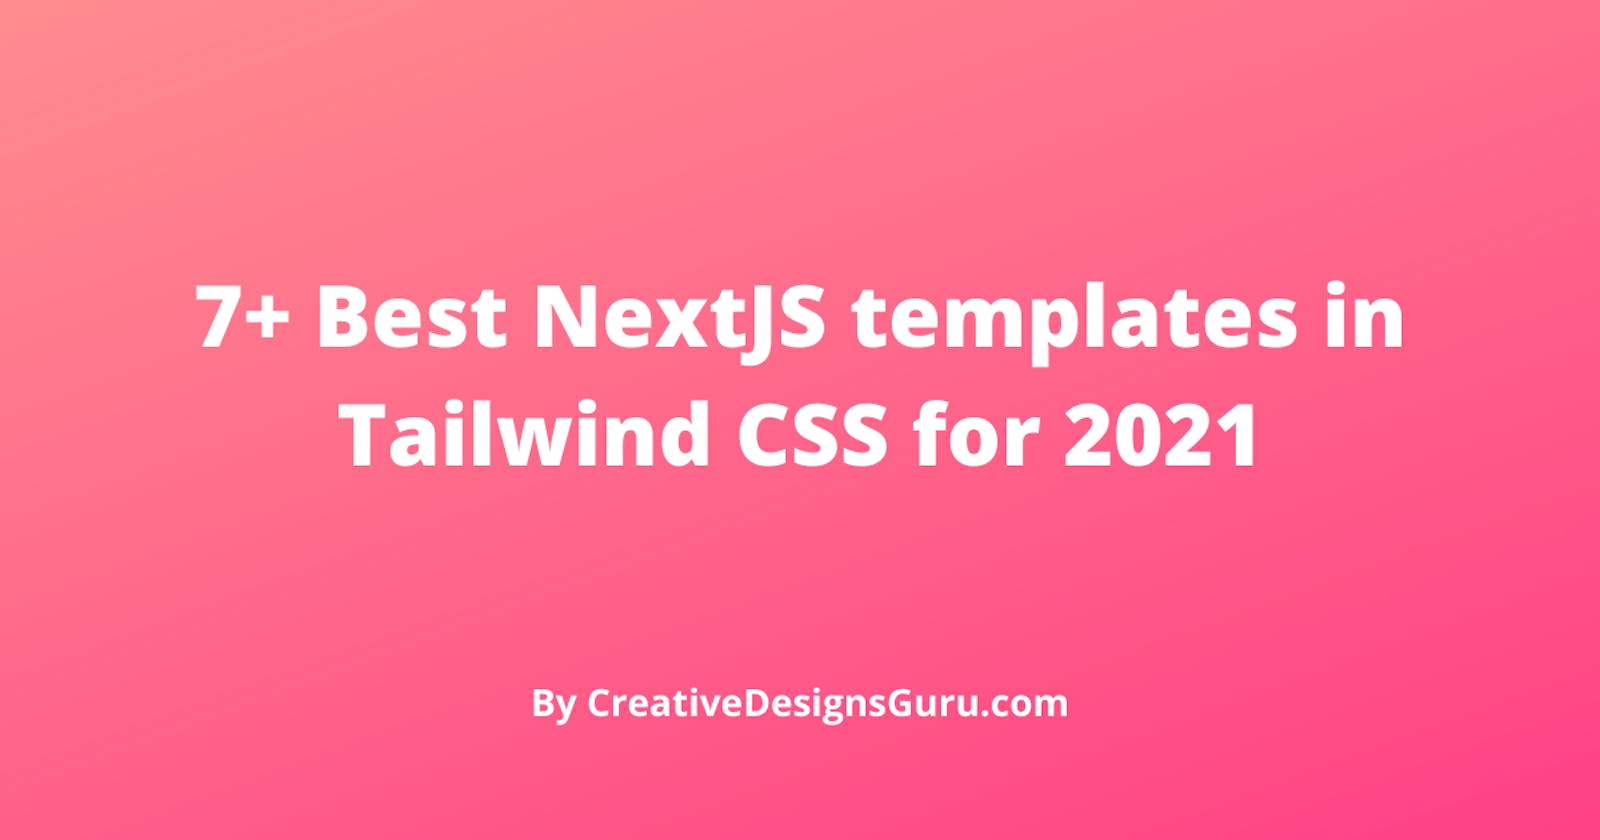 7+ Best NextJS 10 templates in Tailwind CSS for 2021